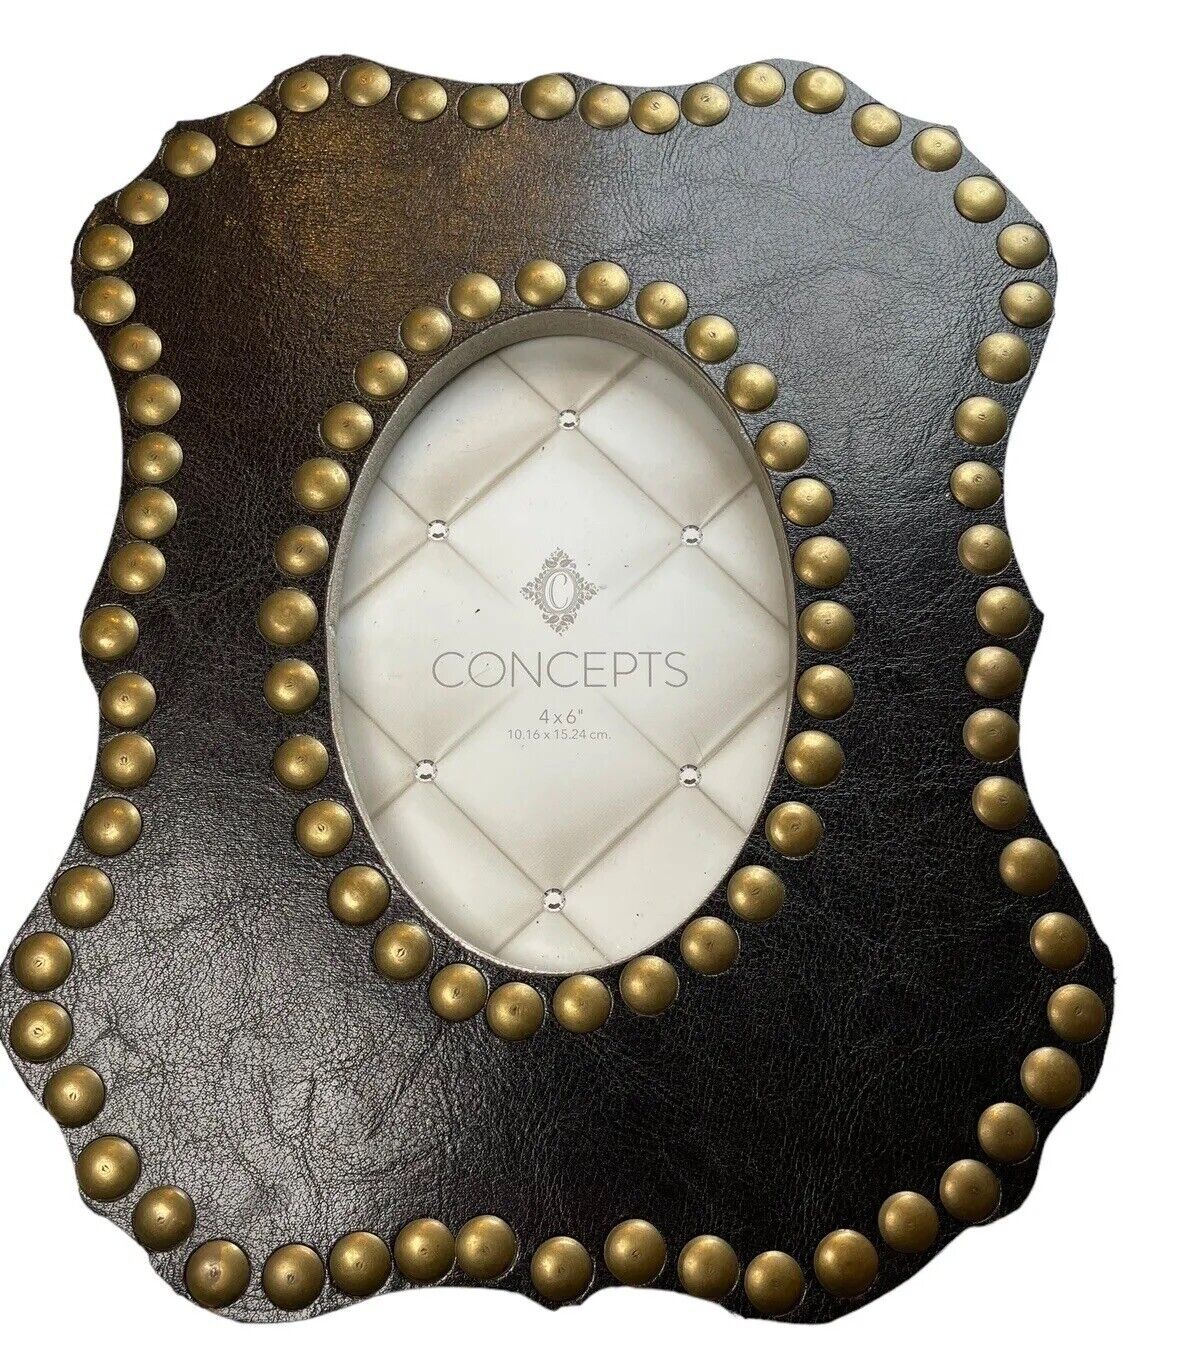 Concepts Black Leather Scalloped Shaped Picture Frame W/ Gold Metal Buttons 4x6